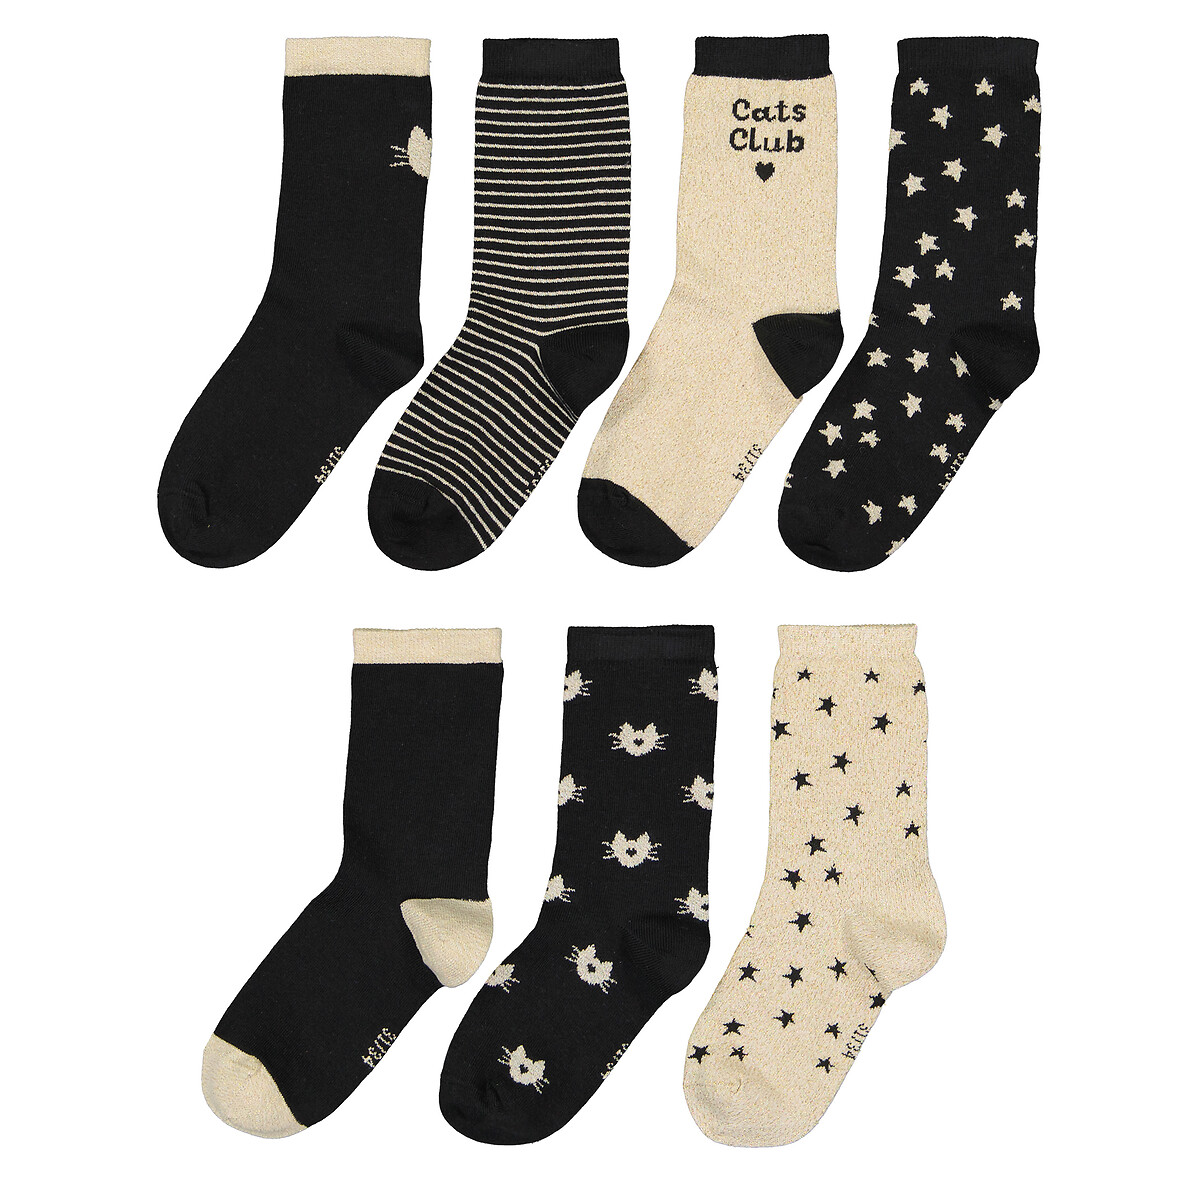 Pack of 7 Pairs of Socks in Cat Print Cotton Mix